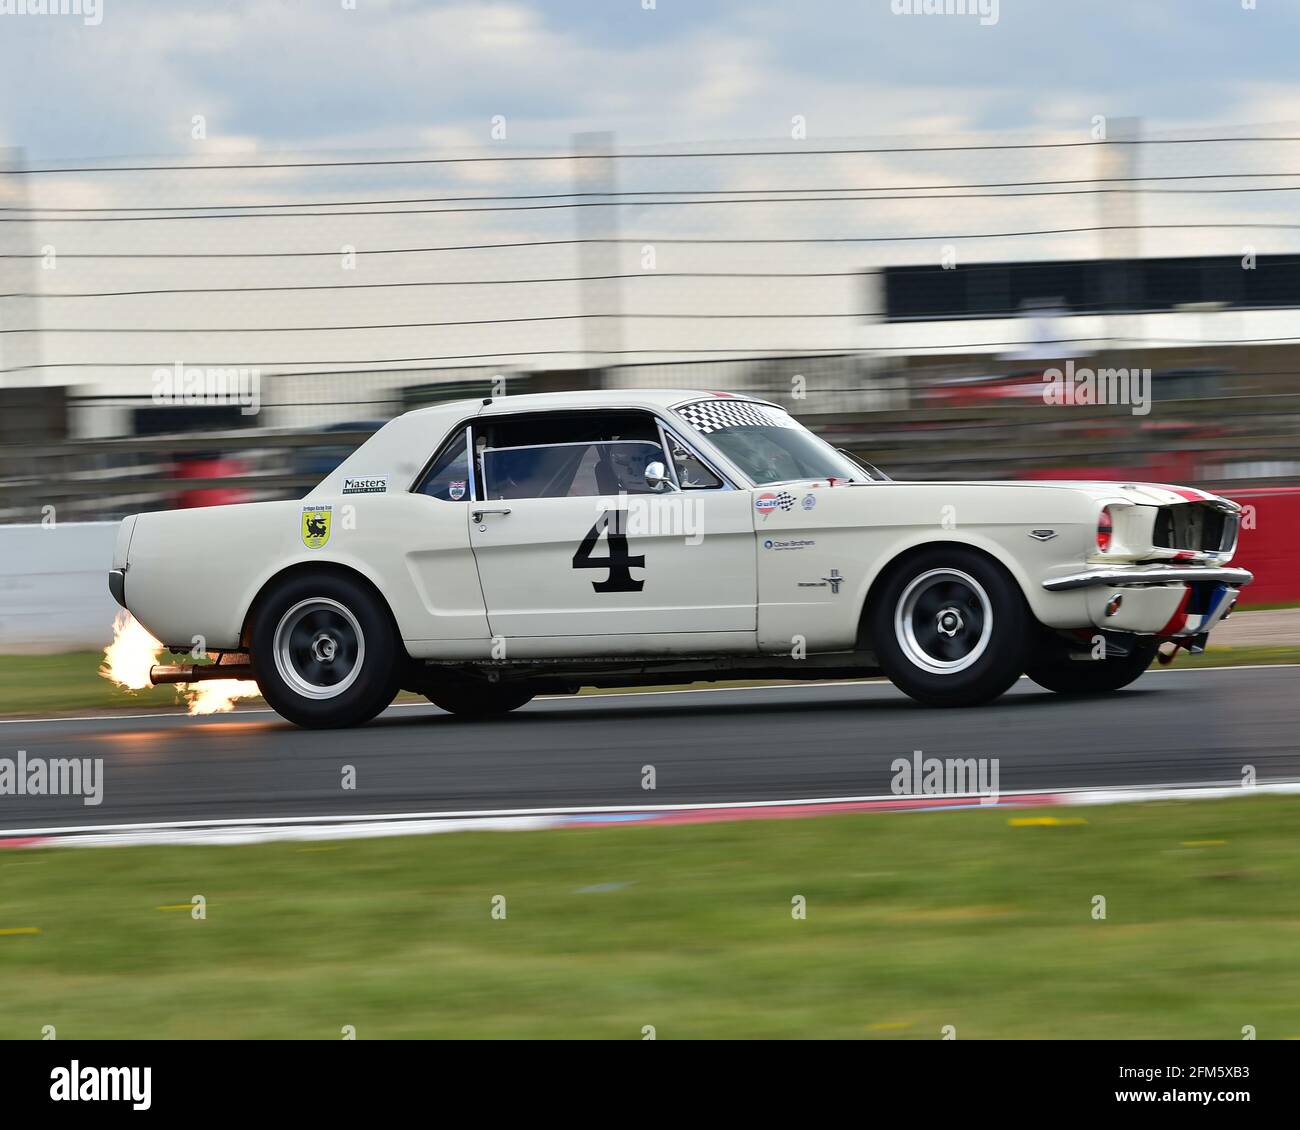 Spitting twin flames on entry to the Fogarty esses, Jon Miles, Dave Coyne, Mark Wright, Ford Mustang, RAC Pall Mall Cup for Pre-66 GT, Sports Racing a Stock Photo